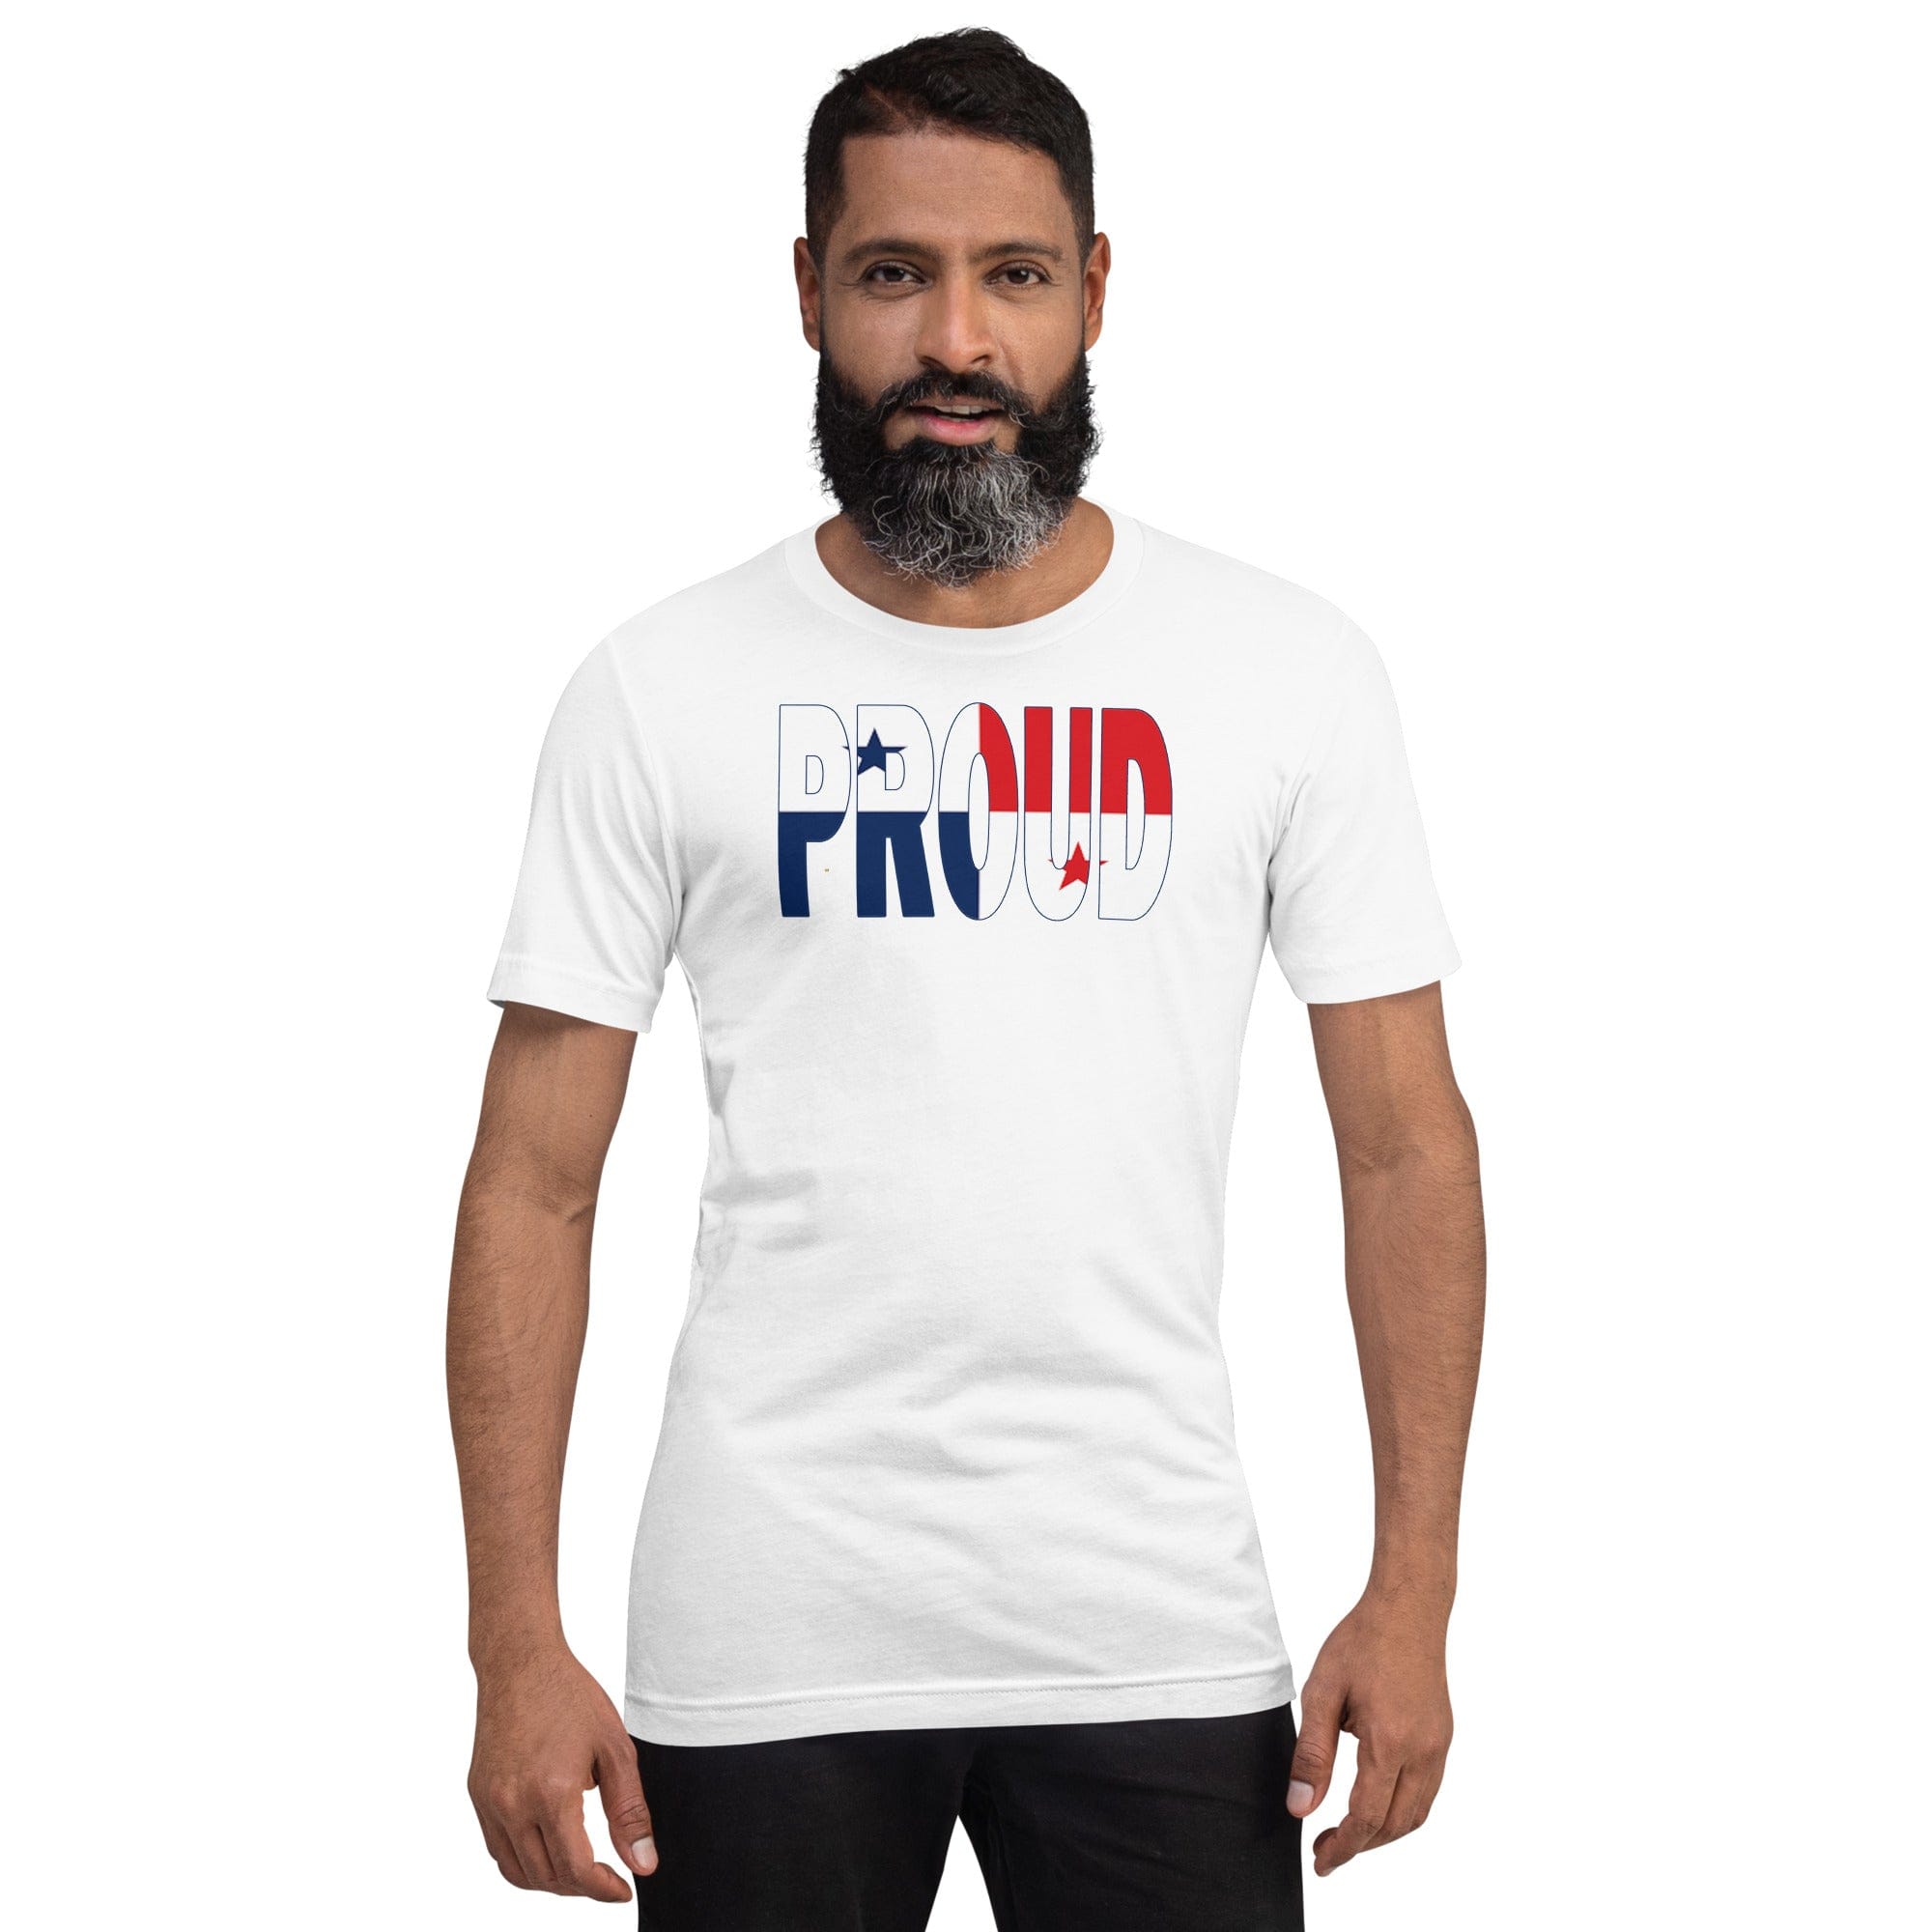 Panama Flag designed to spell Proud on a white color t-shirt worn by a black man.